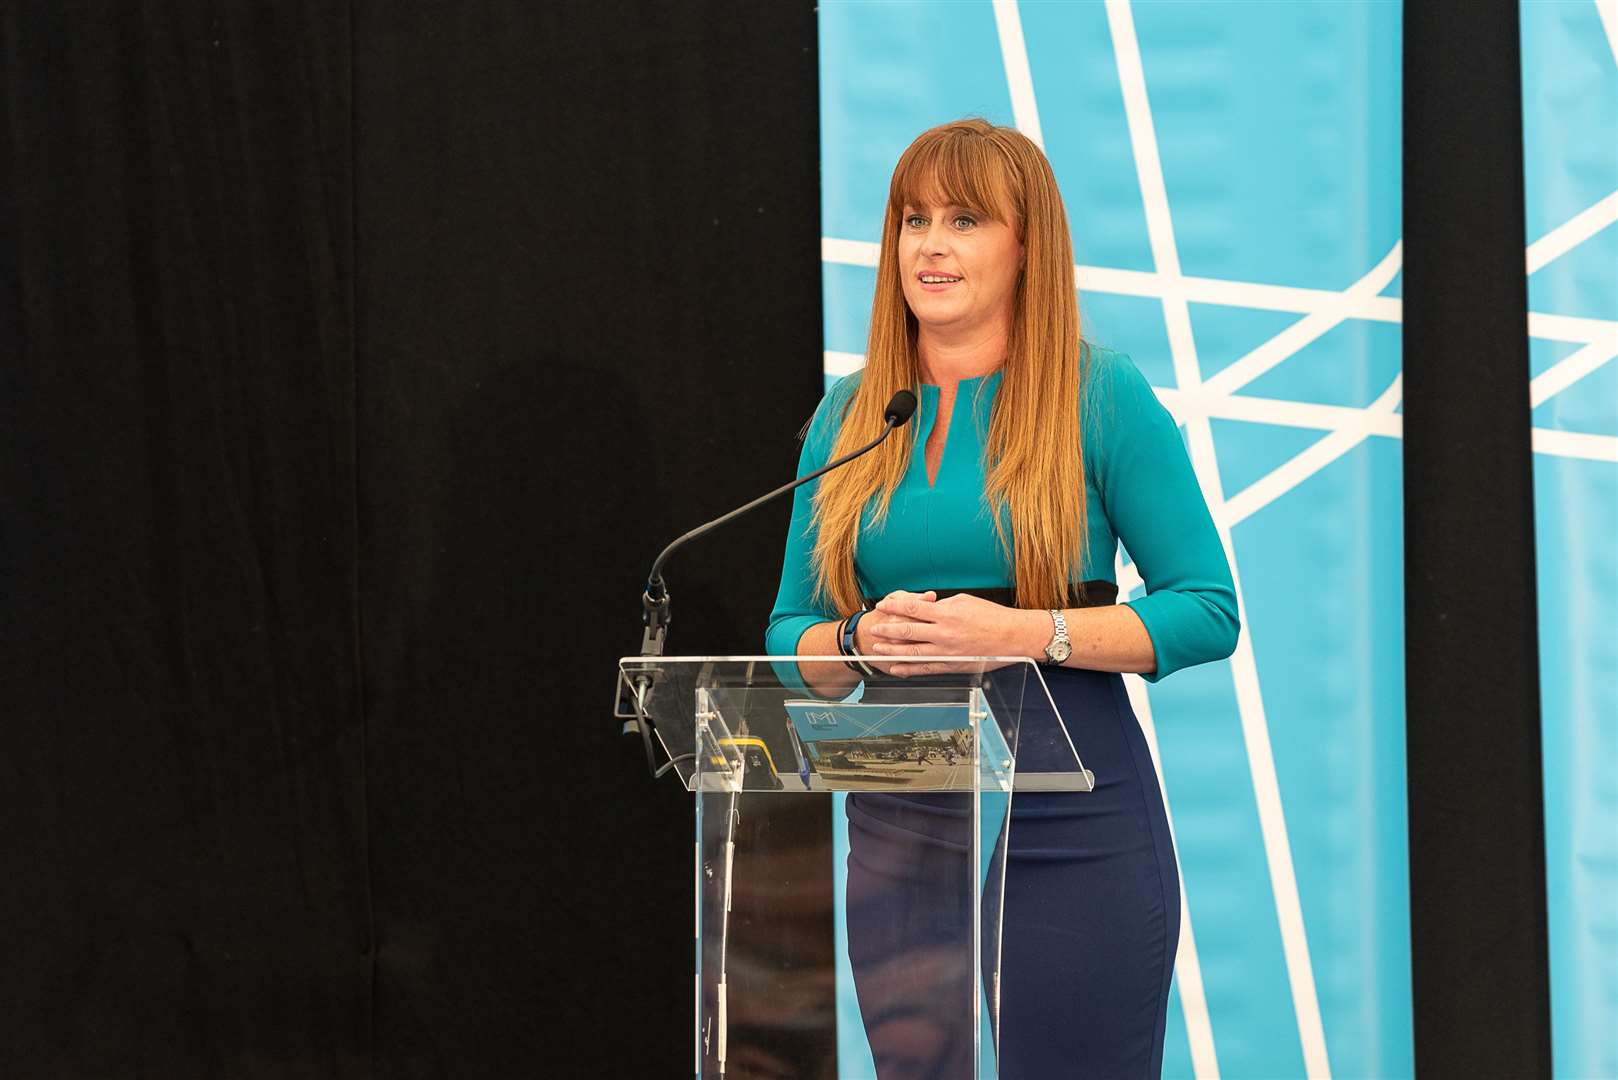 Kelly Tolhurst MP, minister for small business and Member of Parliament for Rochester and Strood